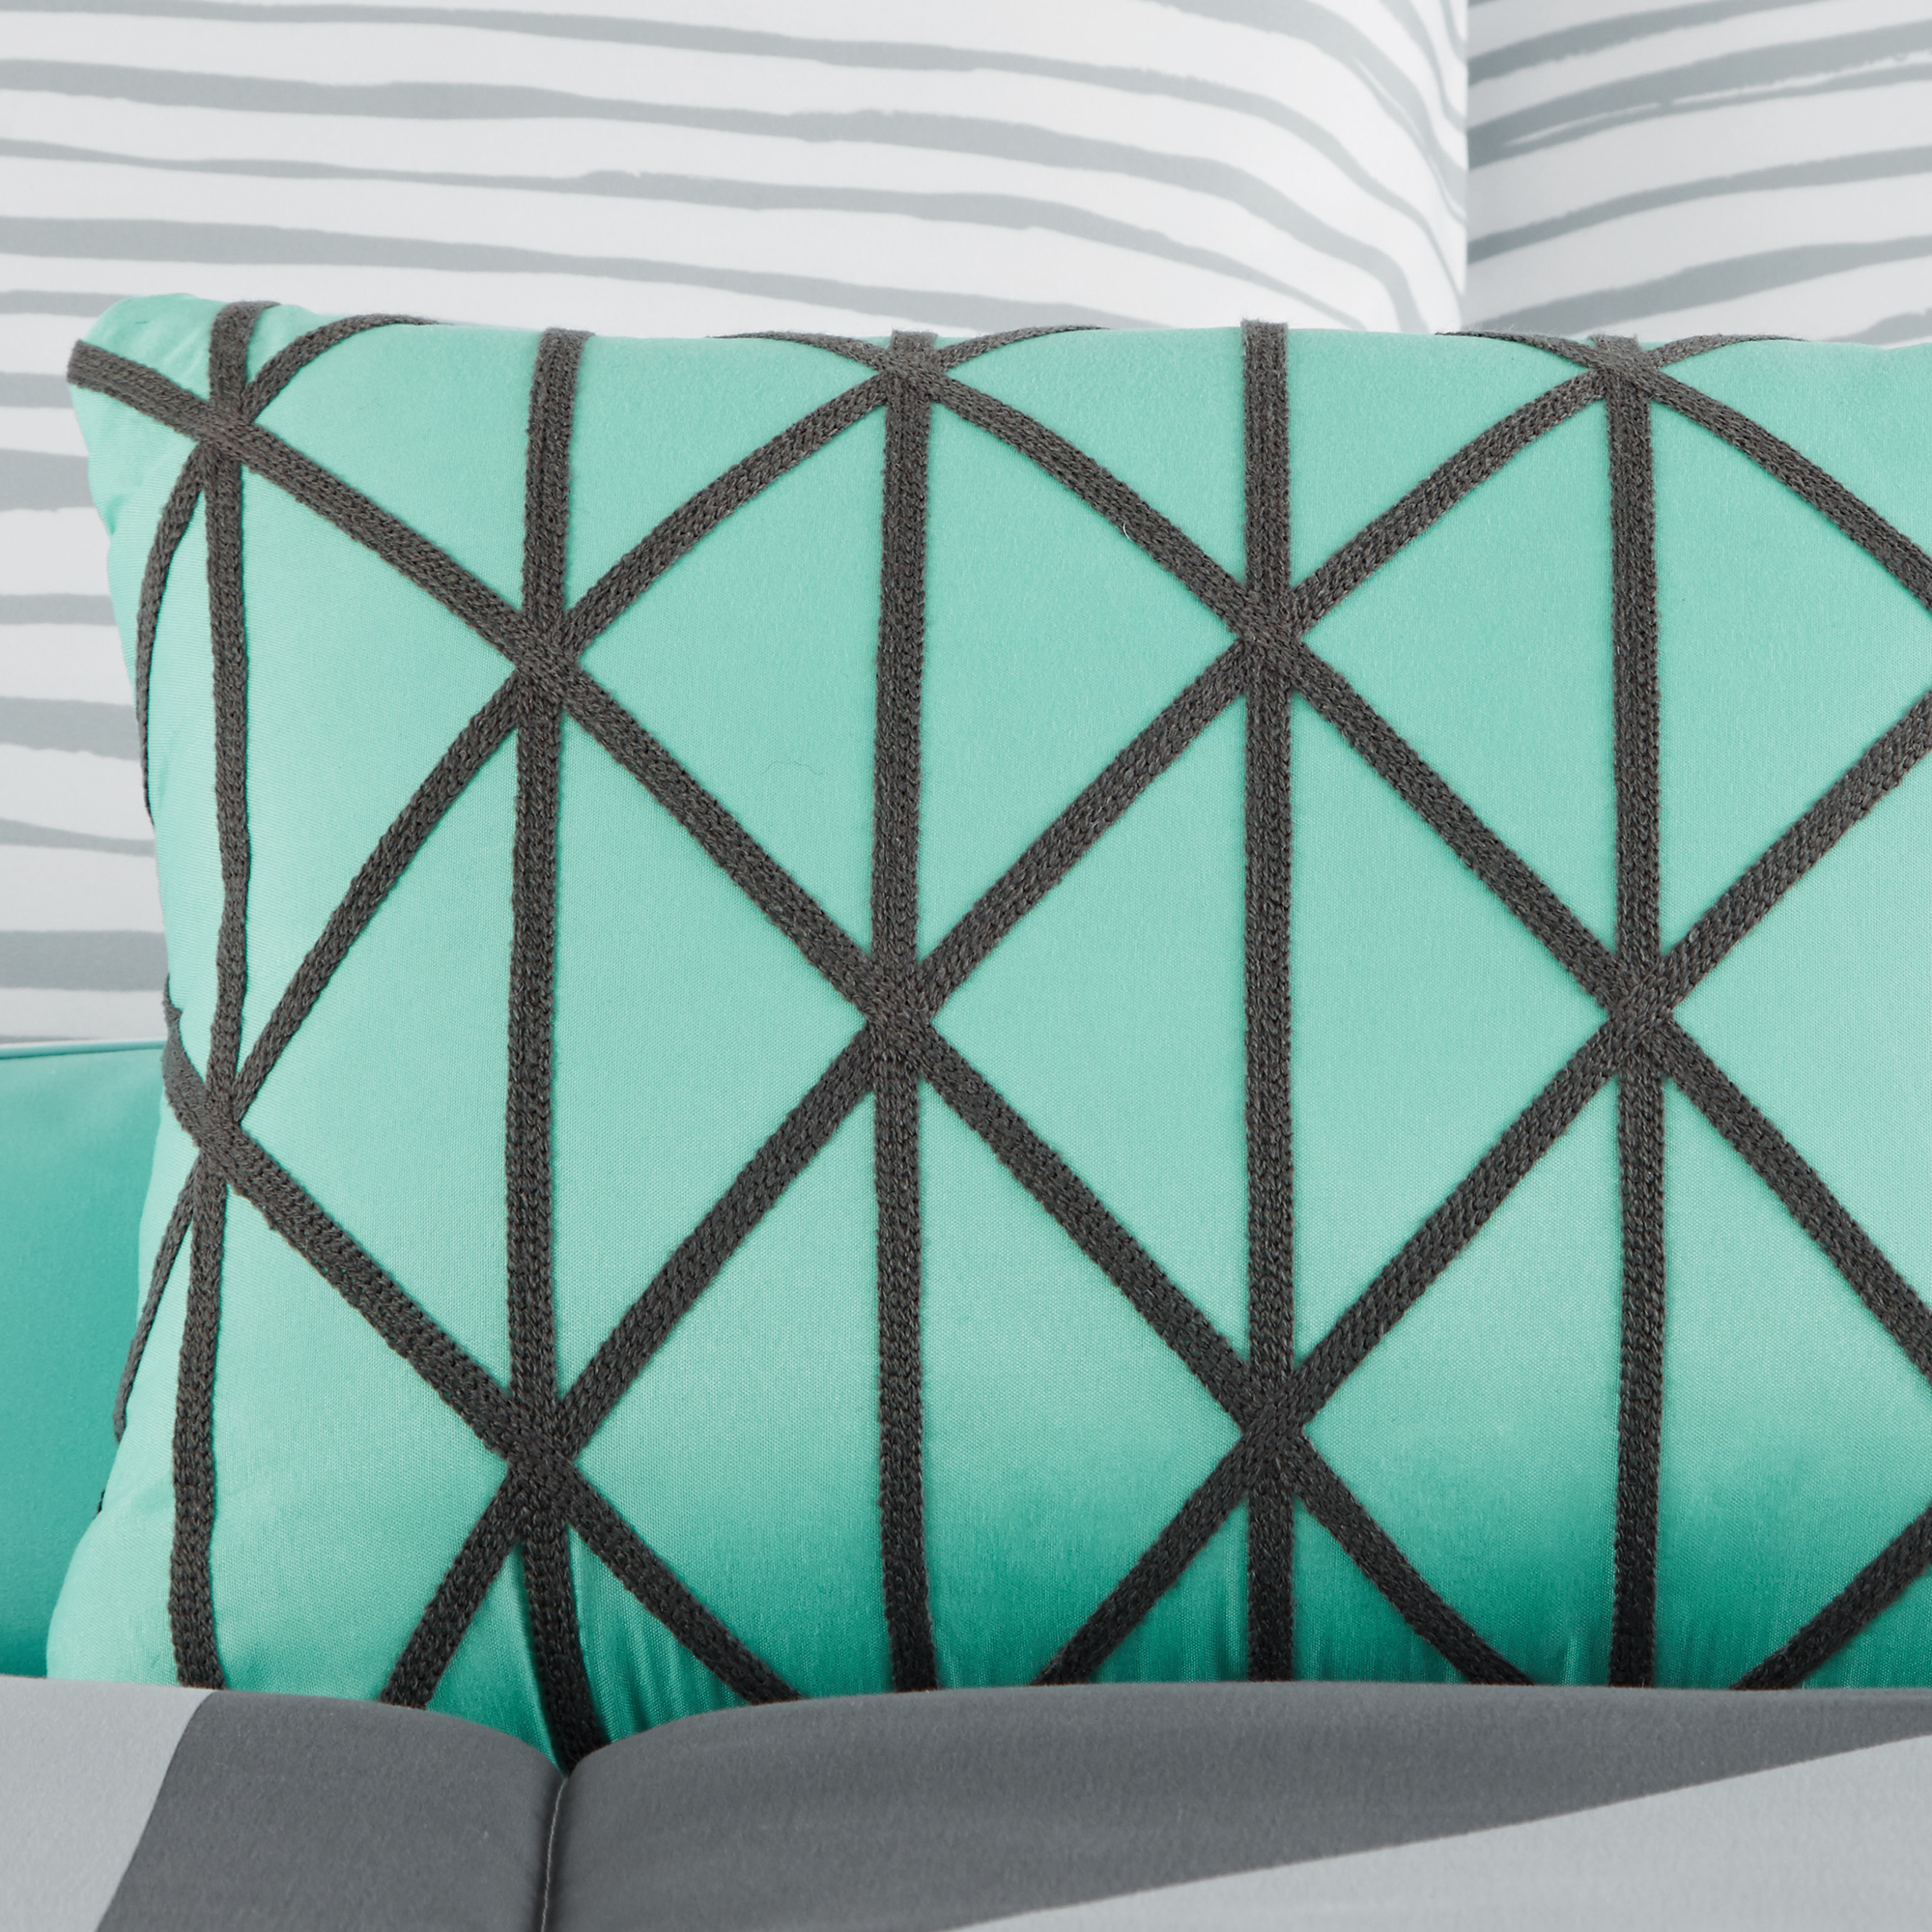 Mainstays Gray and Teal Geometric 8 Piece Bed in a Bag Comforter Set With Sheets, King - image 3 of 8